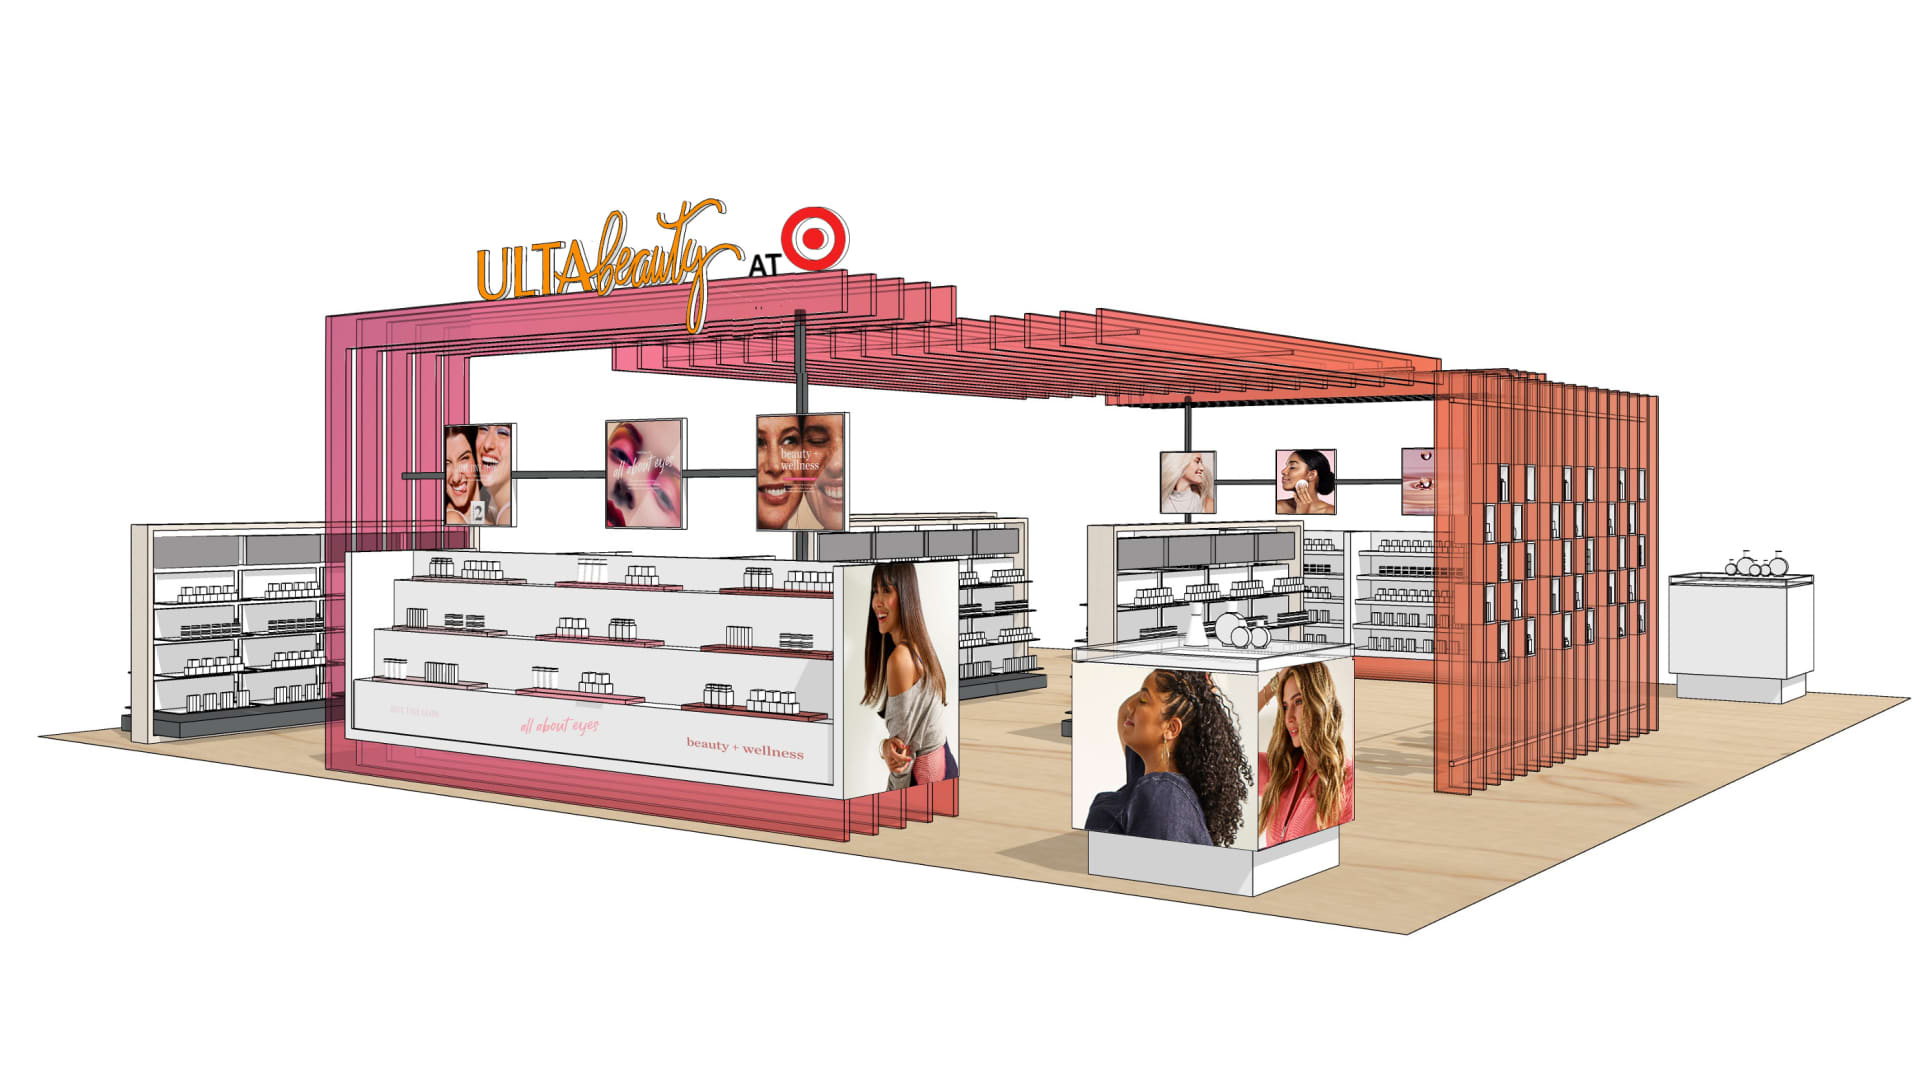 Target has struck a deal with Ulta Beauty to open shops with makeup, skincare, hair products and more inside of hundreds of its stores.